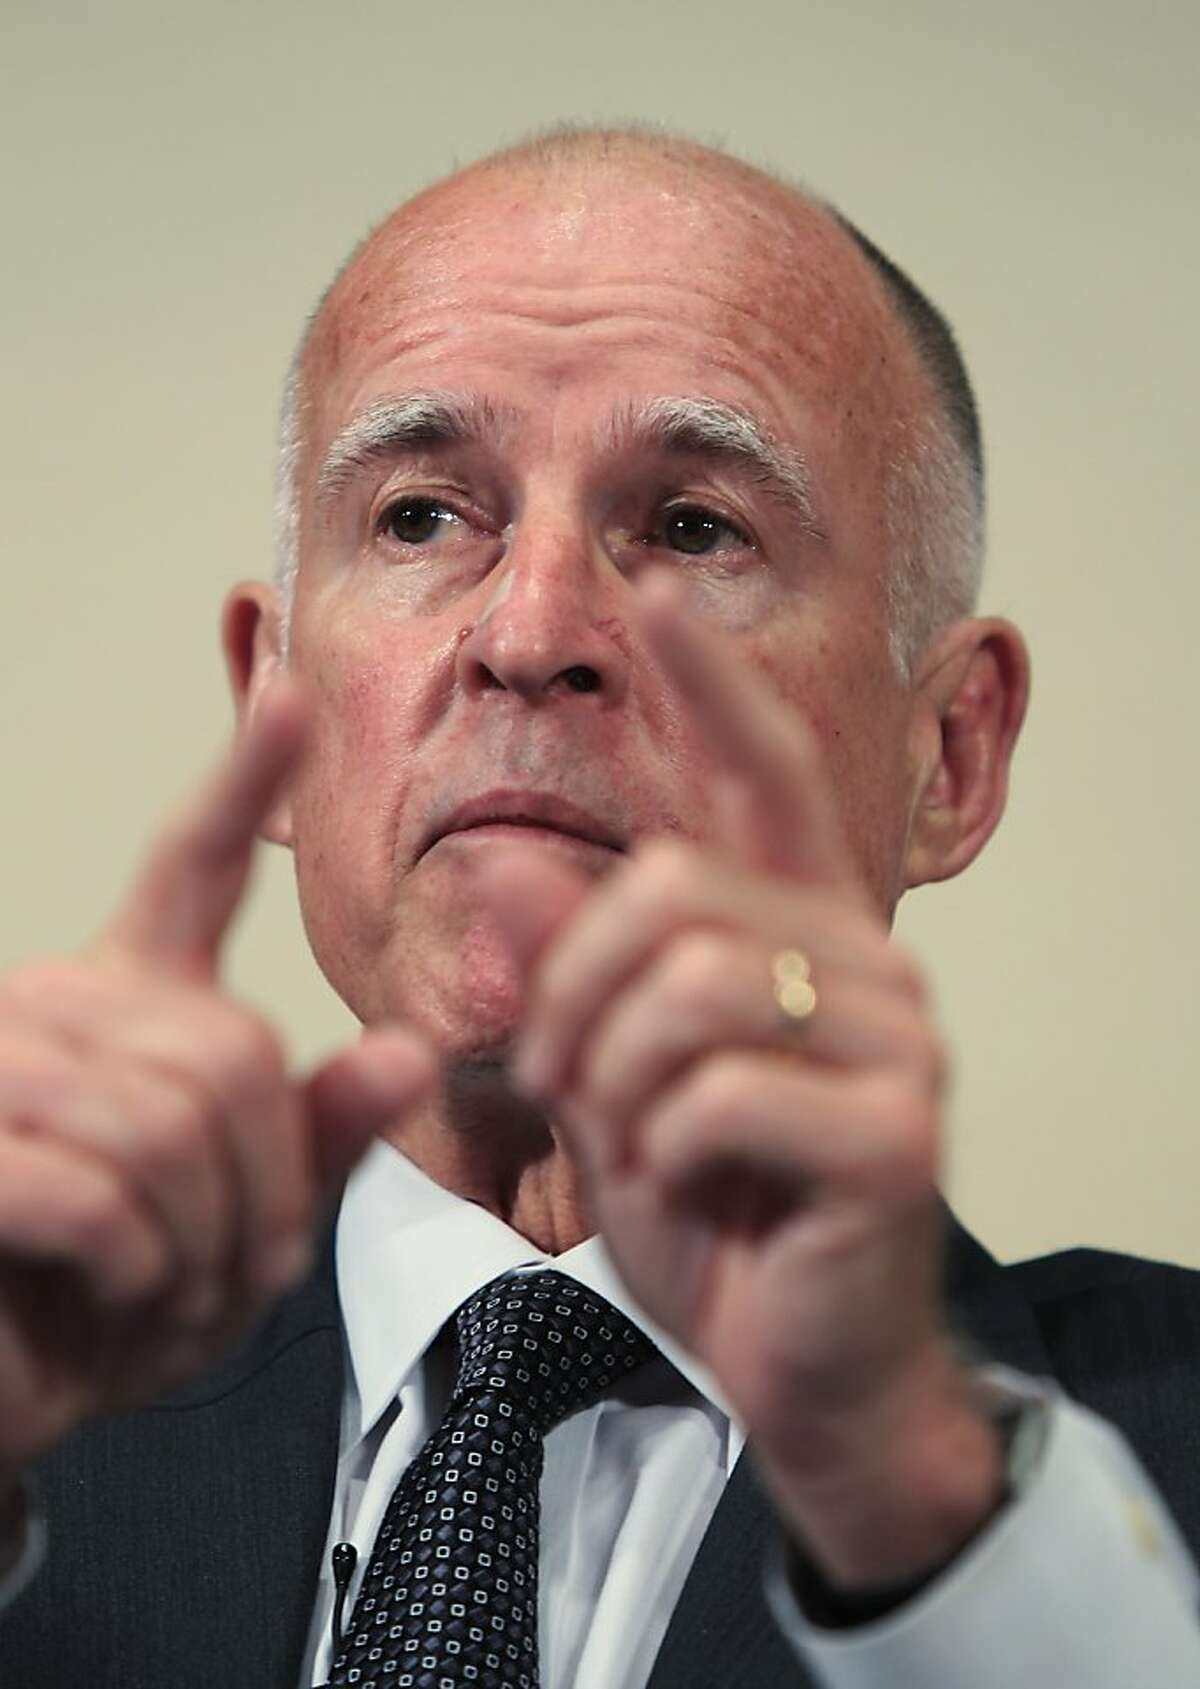 Calif. Gov. Jerry Brown gestures during the 8th Annual CEO Summit at IBM offices in San Jose, Calif., Friday, April 22, 2011.